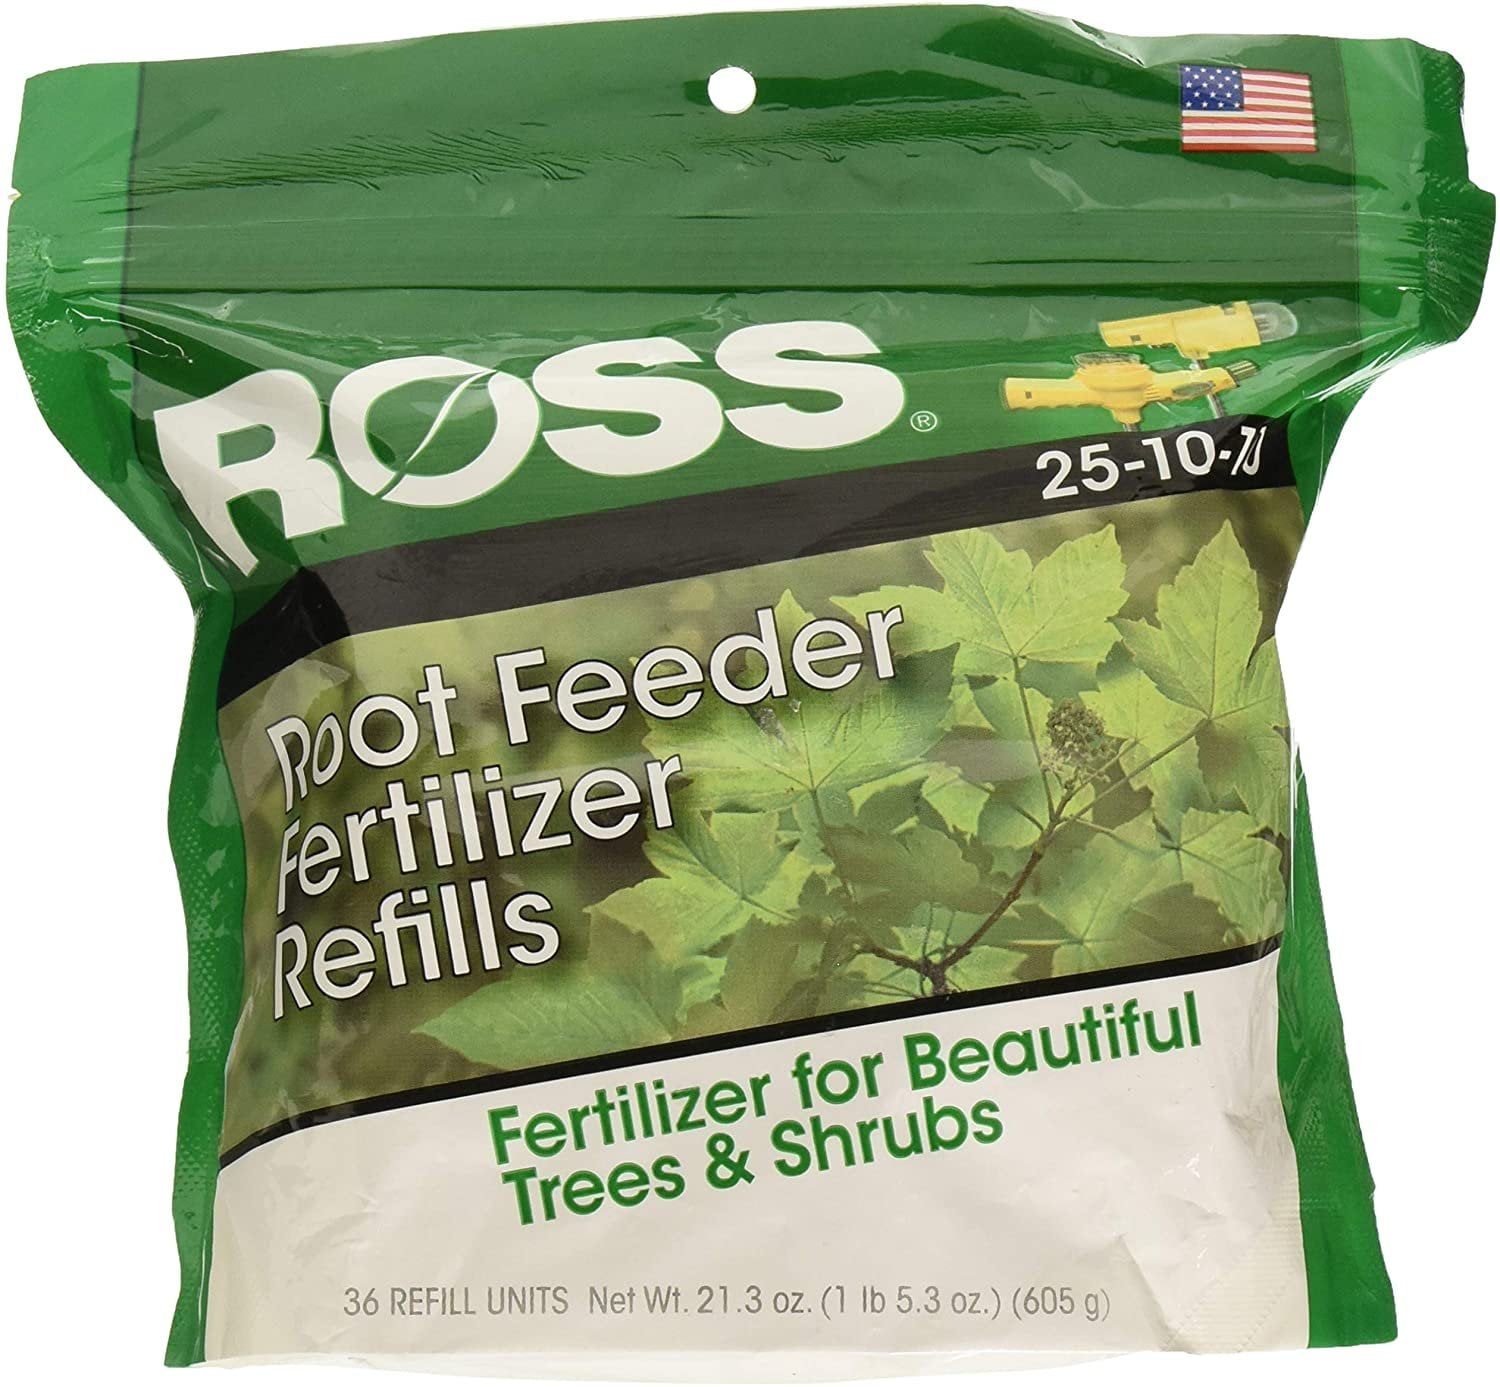 Details about   Ross 12044A 100047070 Heavy Duty Root Feeder Model 